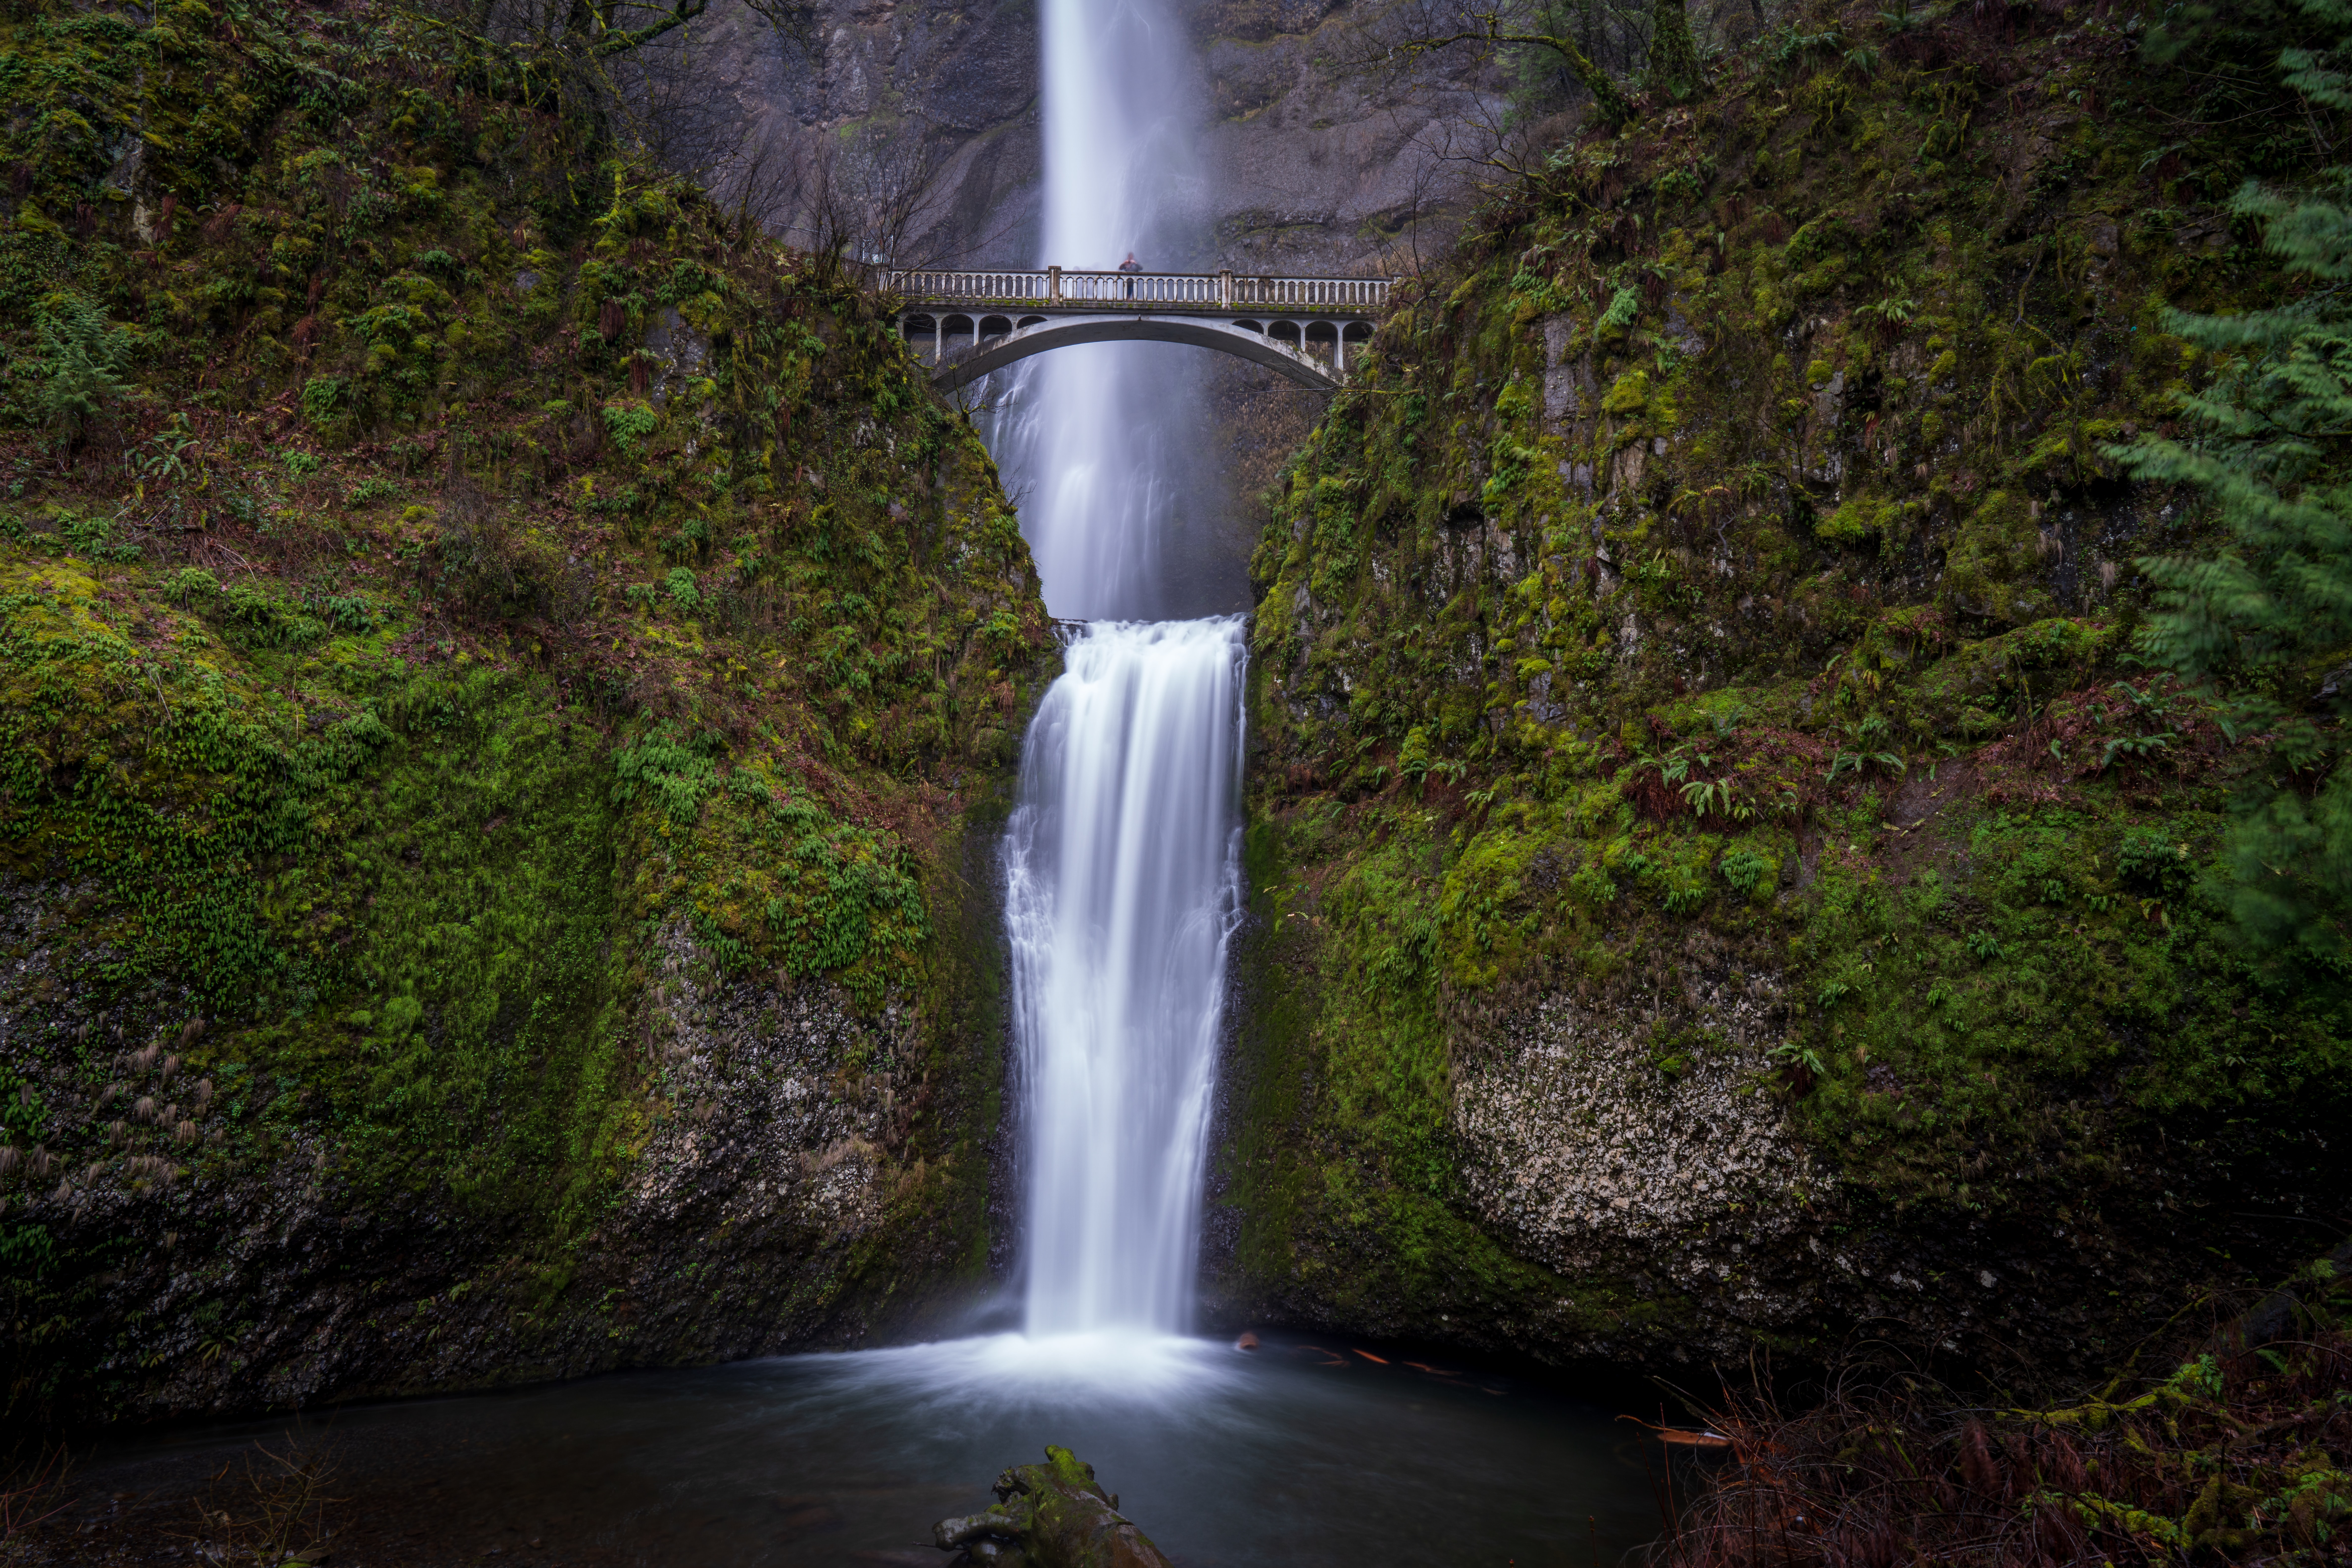 Multnomah Falls in the Columbia River Gorge along the scenic, historic Highway 30 in Oregon.